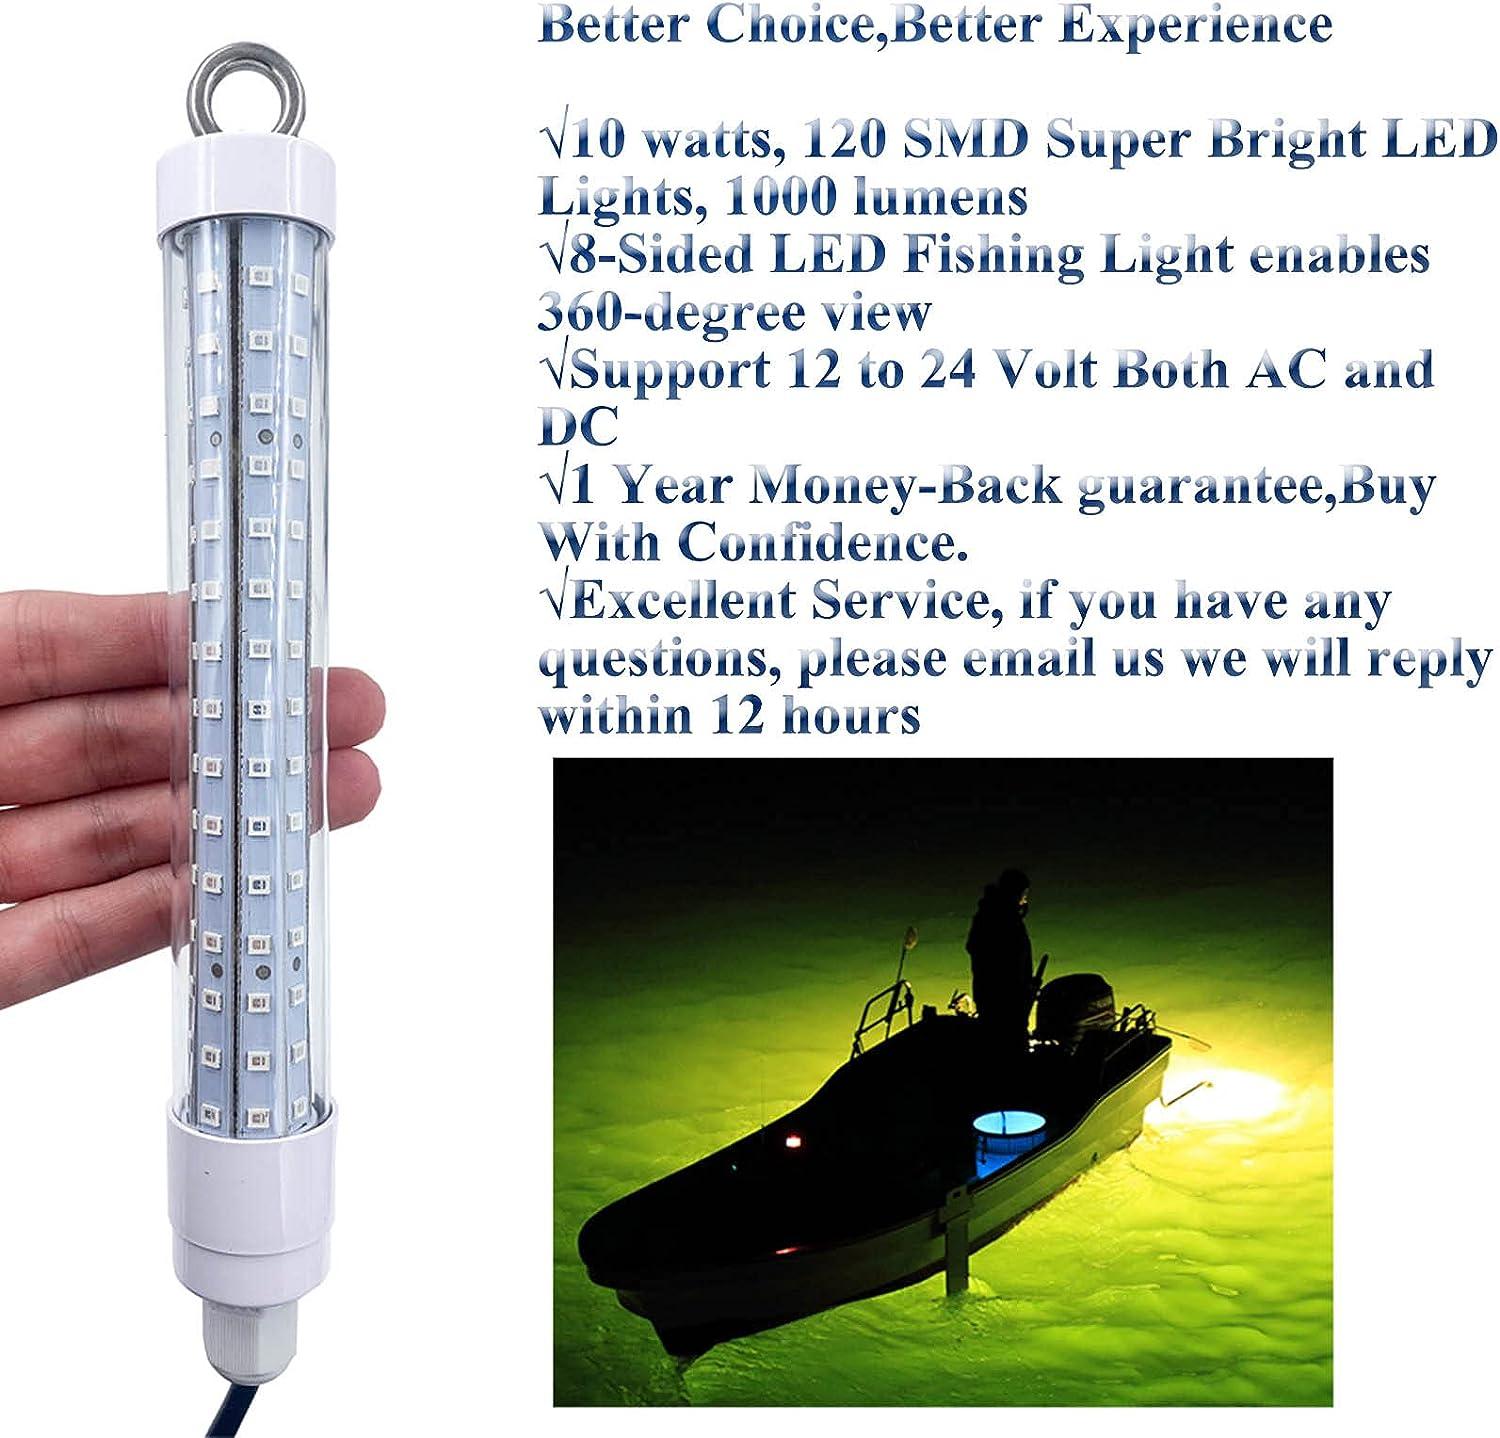 Waterproof 13W DC12V LED Fishing Light For Submersible Hydrofoil Boat  Attracts Squid And Krill For Night Fishing From Best2011, $13.93